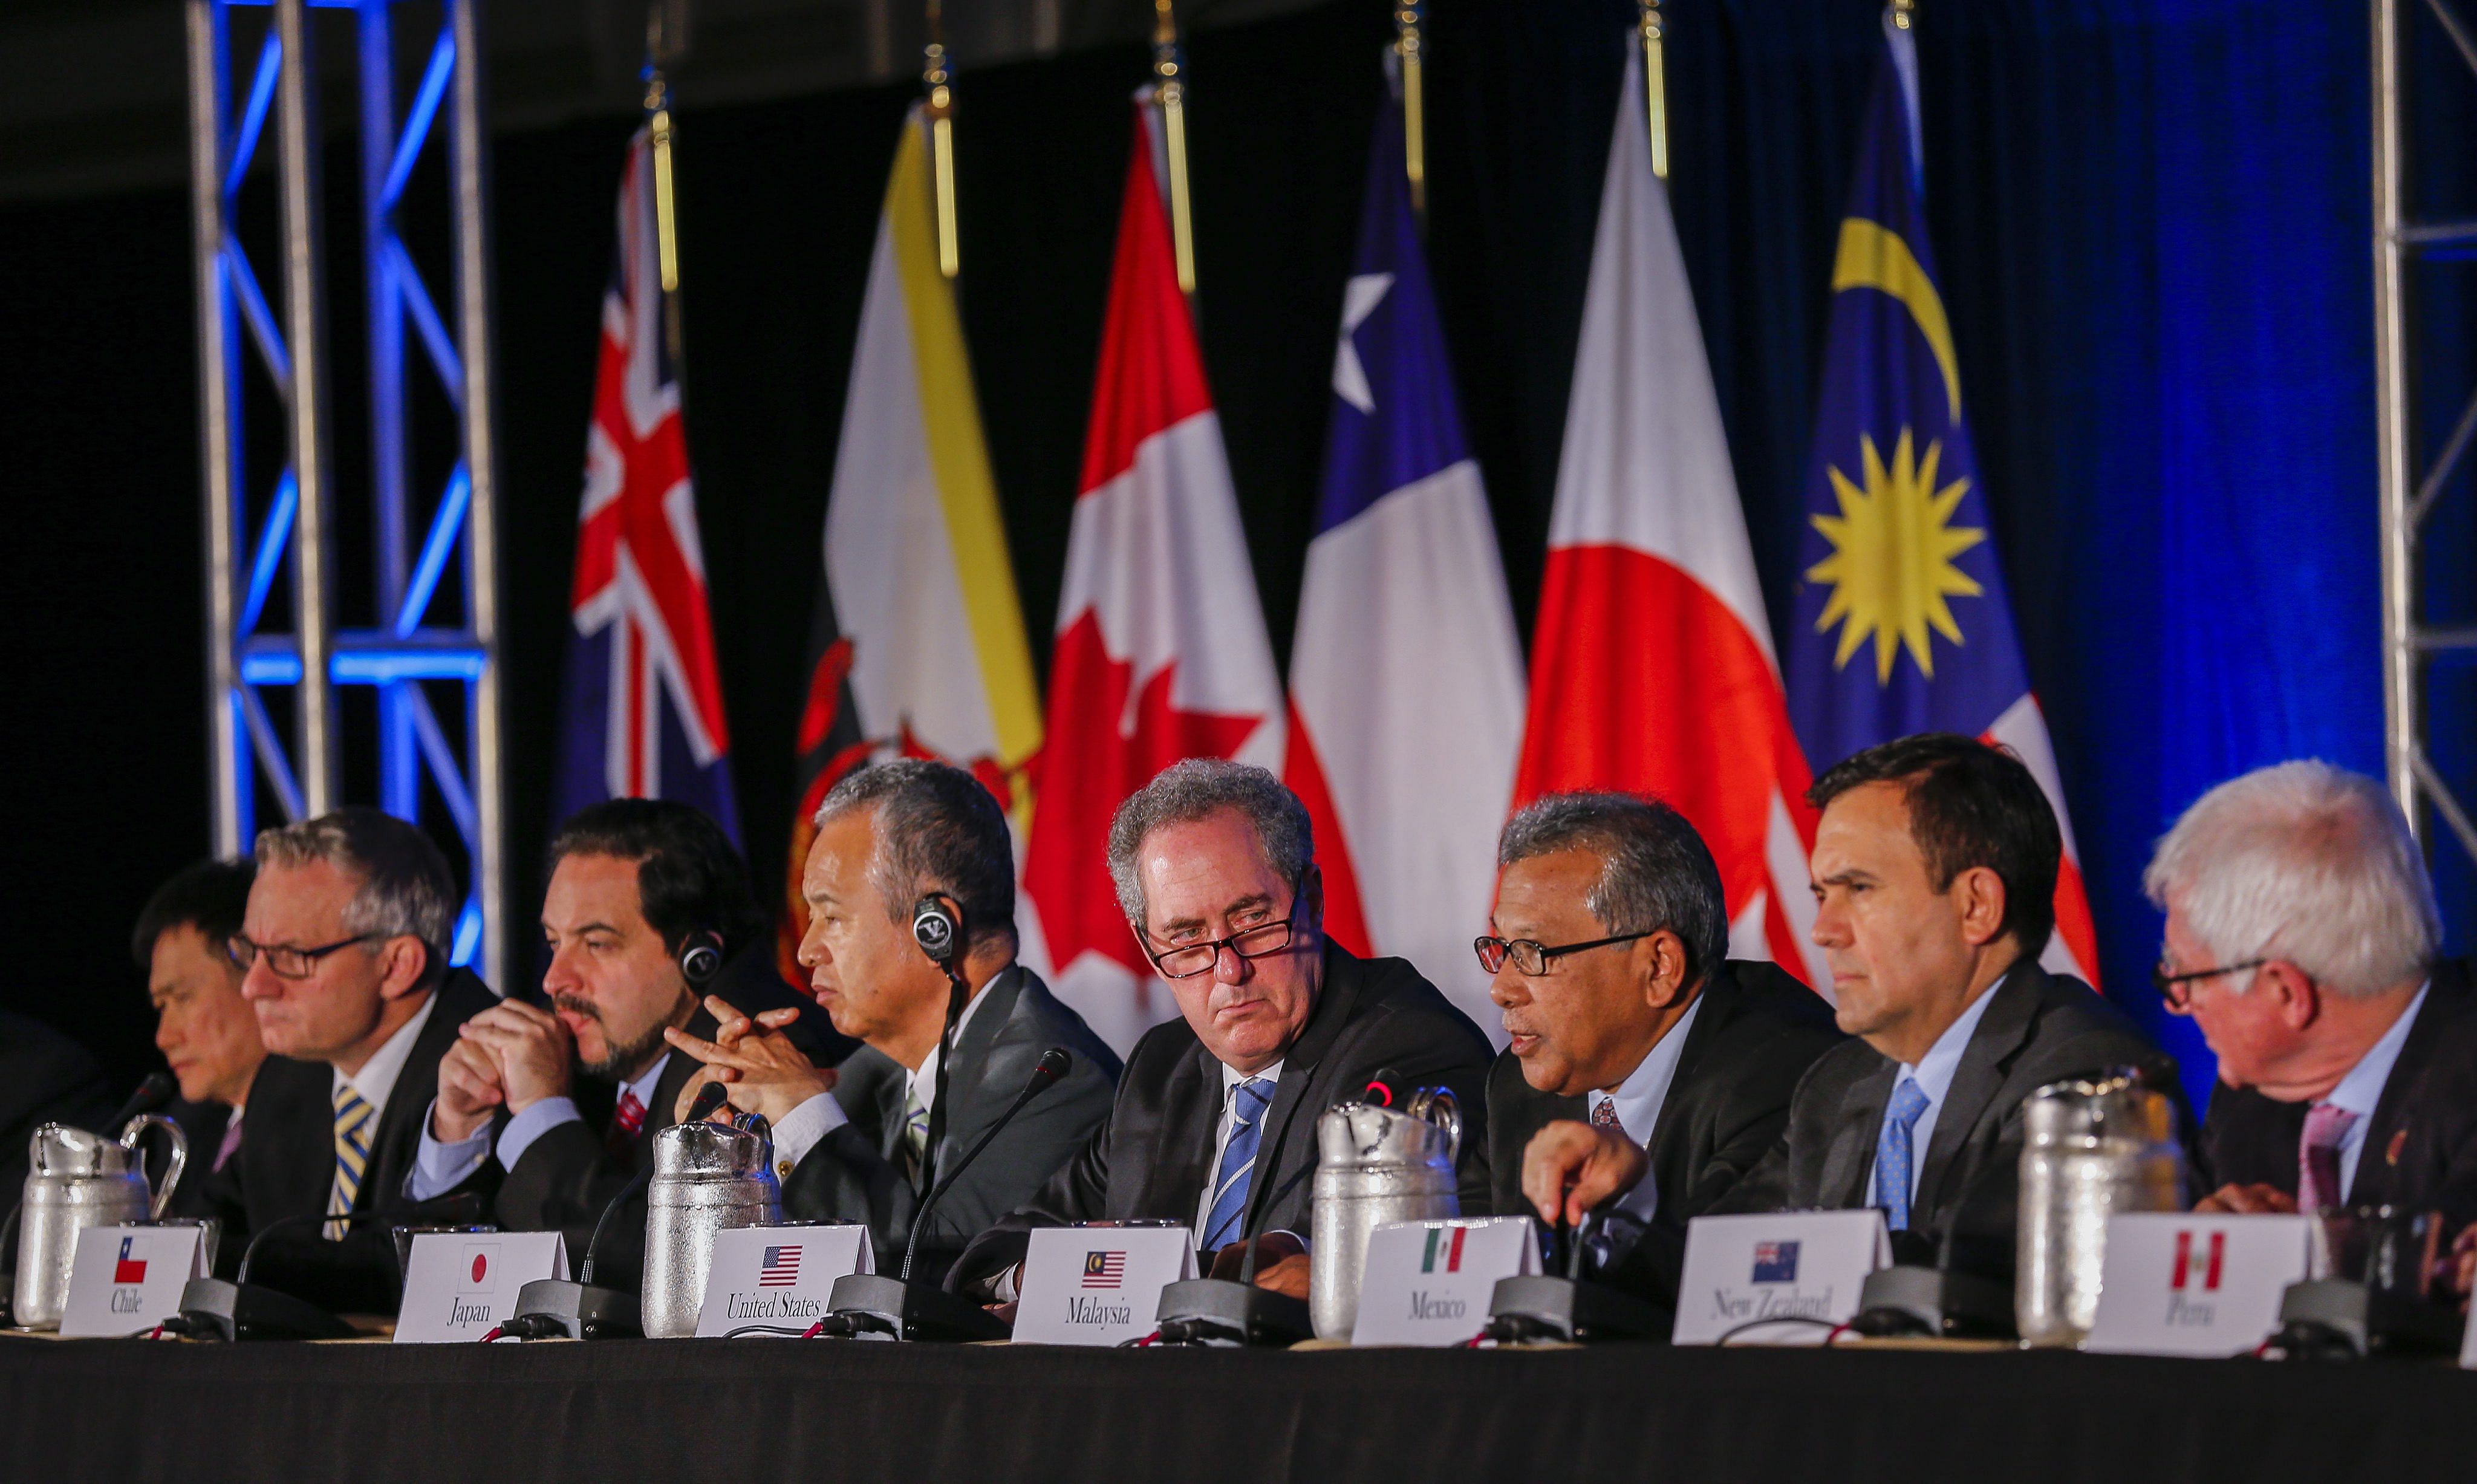 United States Trade Representative Michael Froman (centre) being flanked by international counterparts during the closing press conference after an agreement was reached by 12 TPP member countries in Atlanta, in the US, on Oct 5.